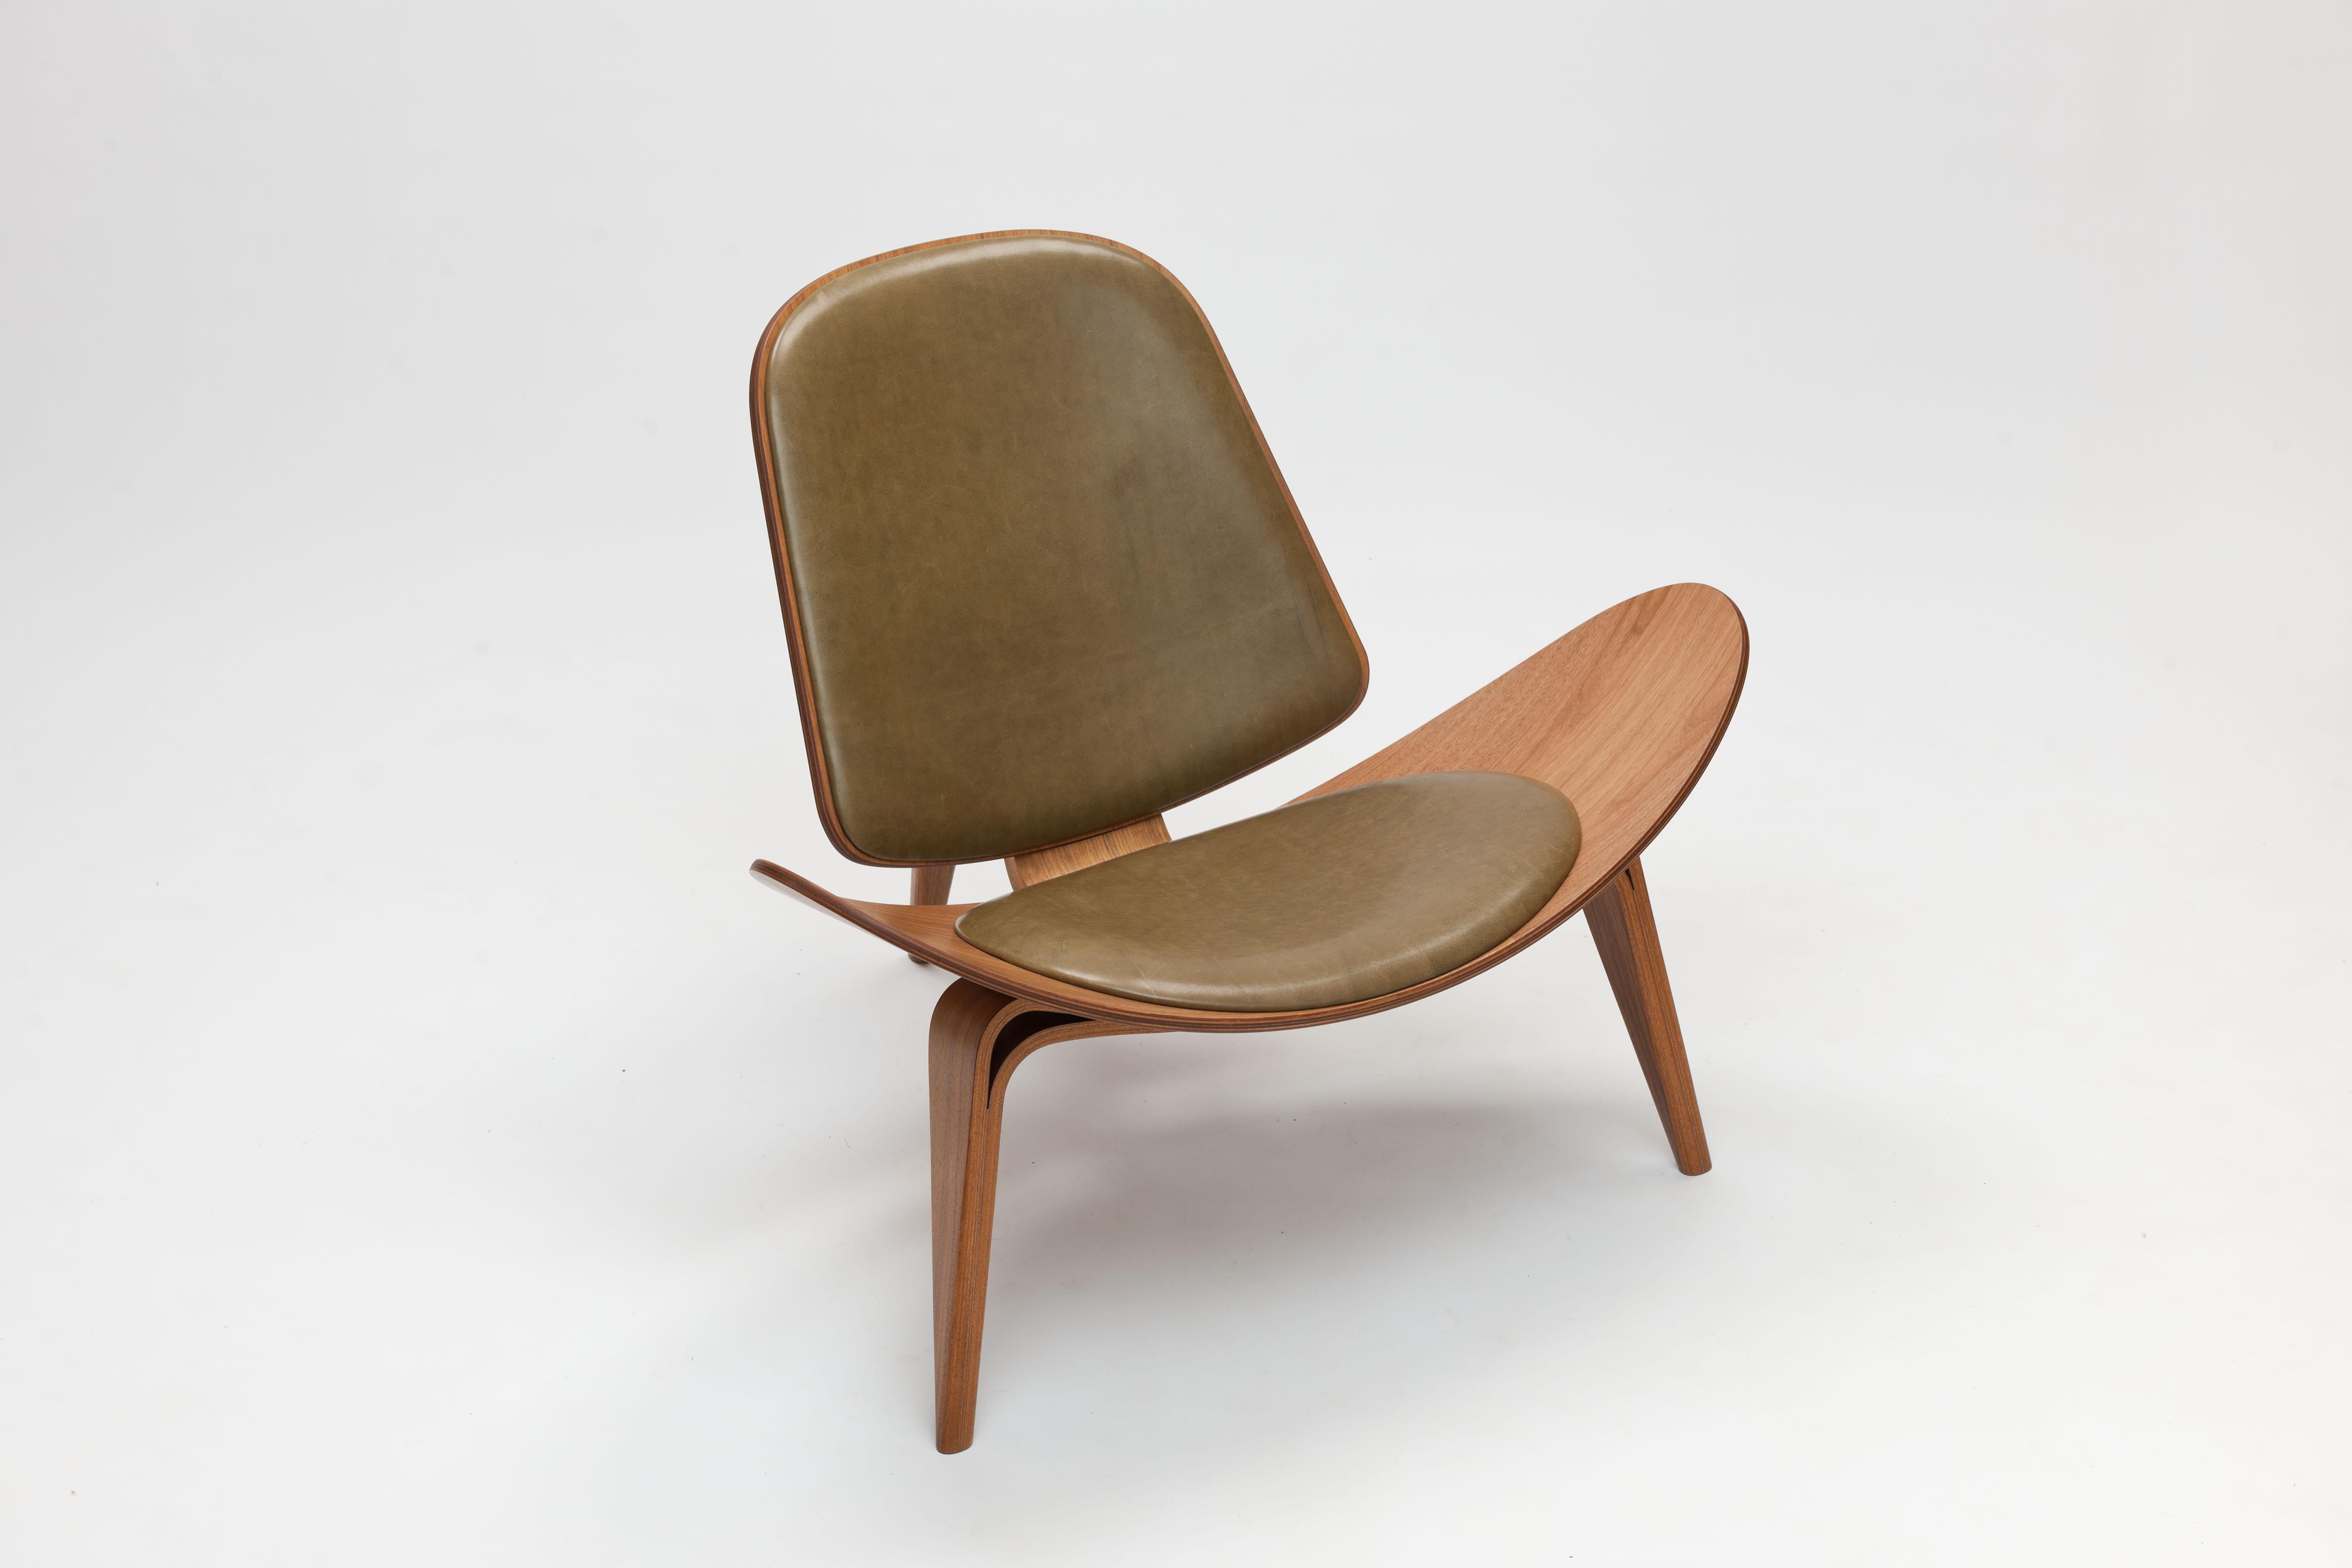 Pair (2) of NEW bespoke green leather and walnut CH07 / Shell Chairs by Danish designer Hans Jørgen Wegner for Carl Hansen & Son. 
Lead Time 6-8 weeks. 

These chairs are new and will be ordered Bespoke especially for Carmen. 

